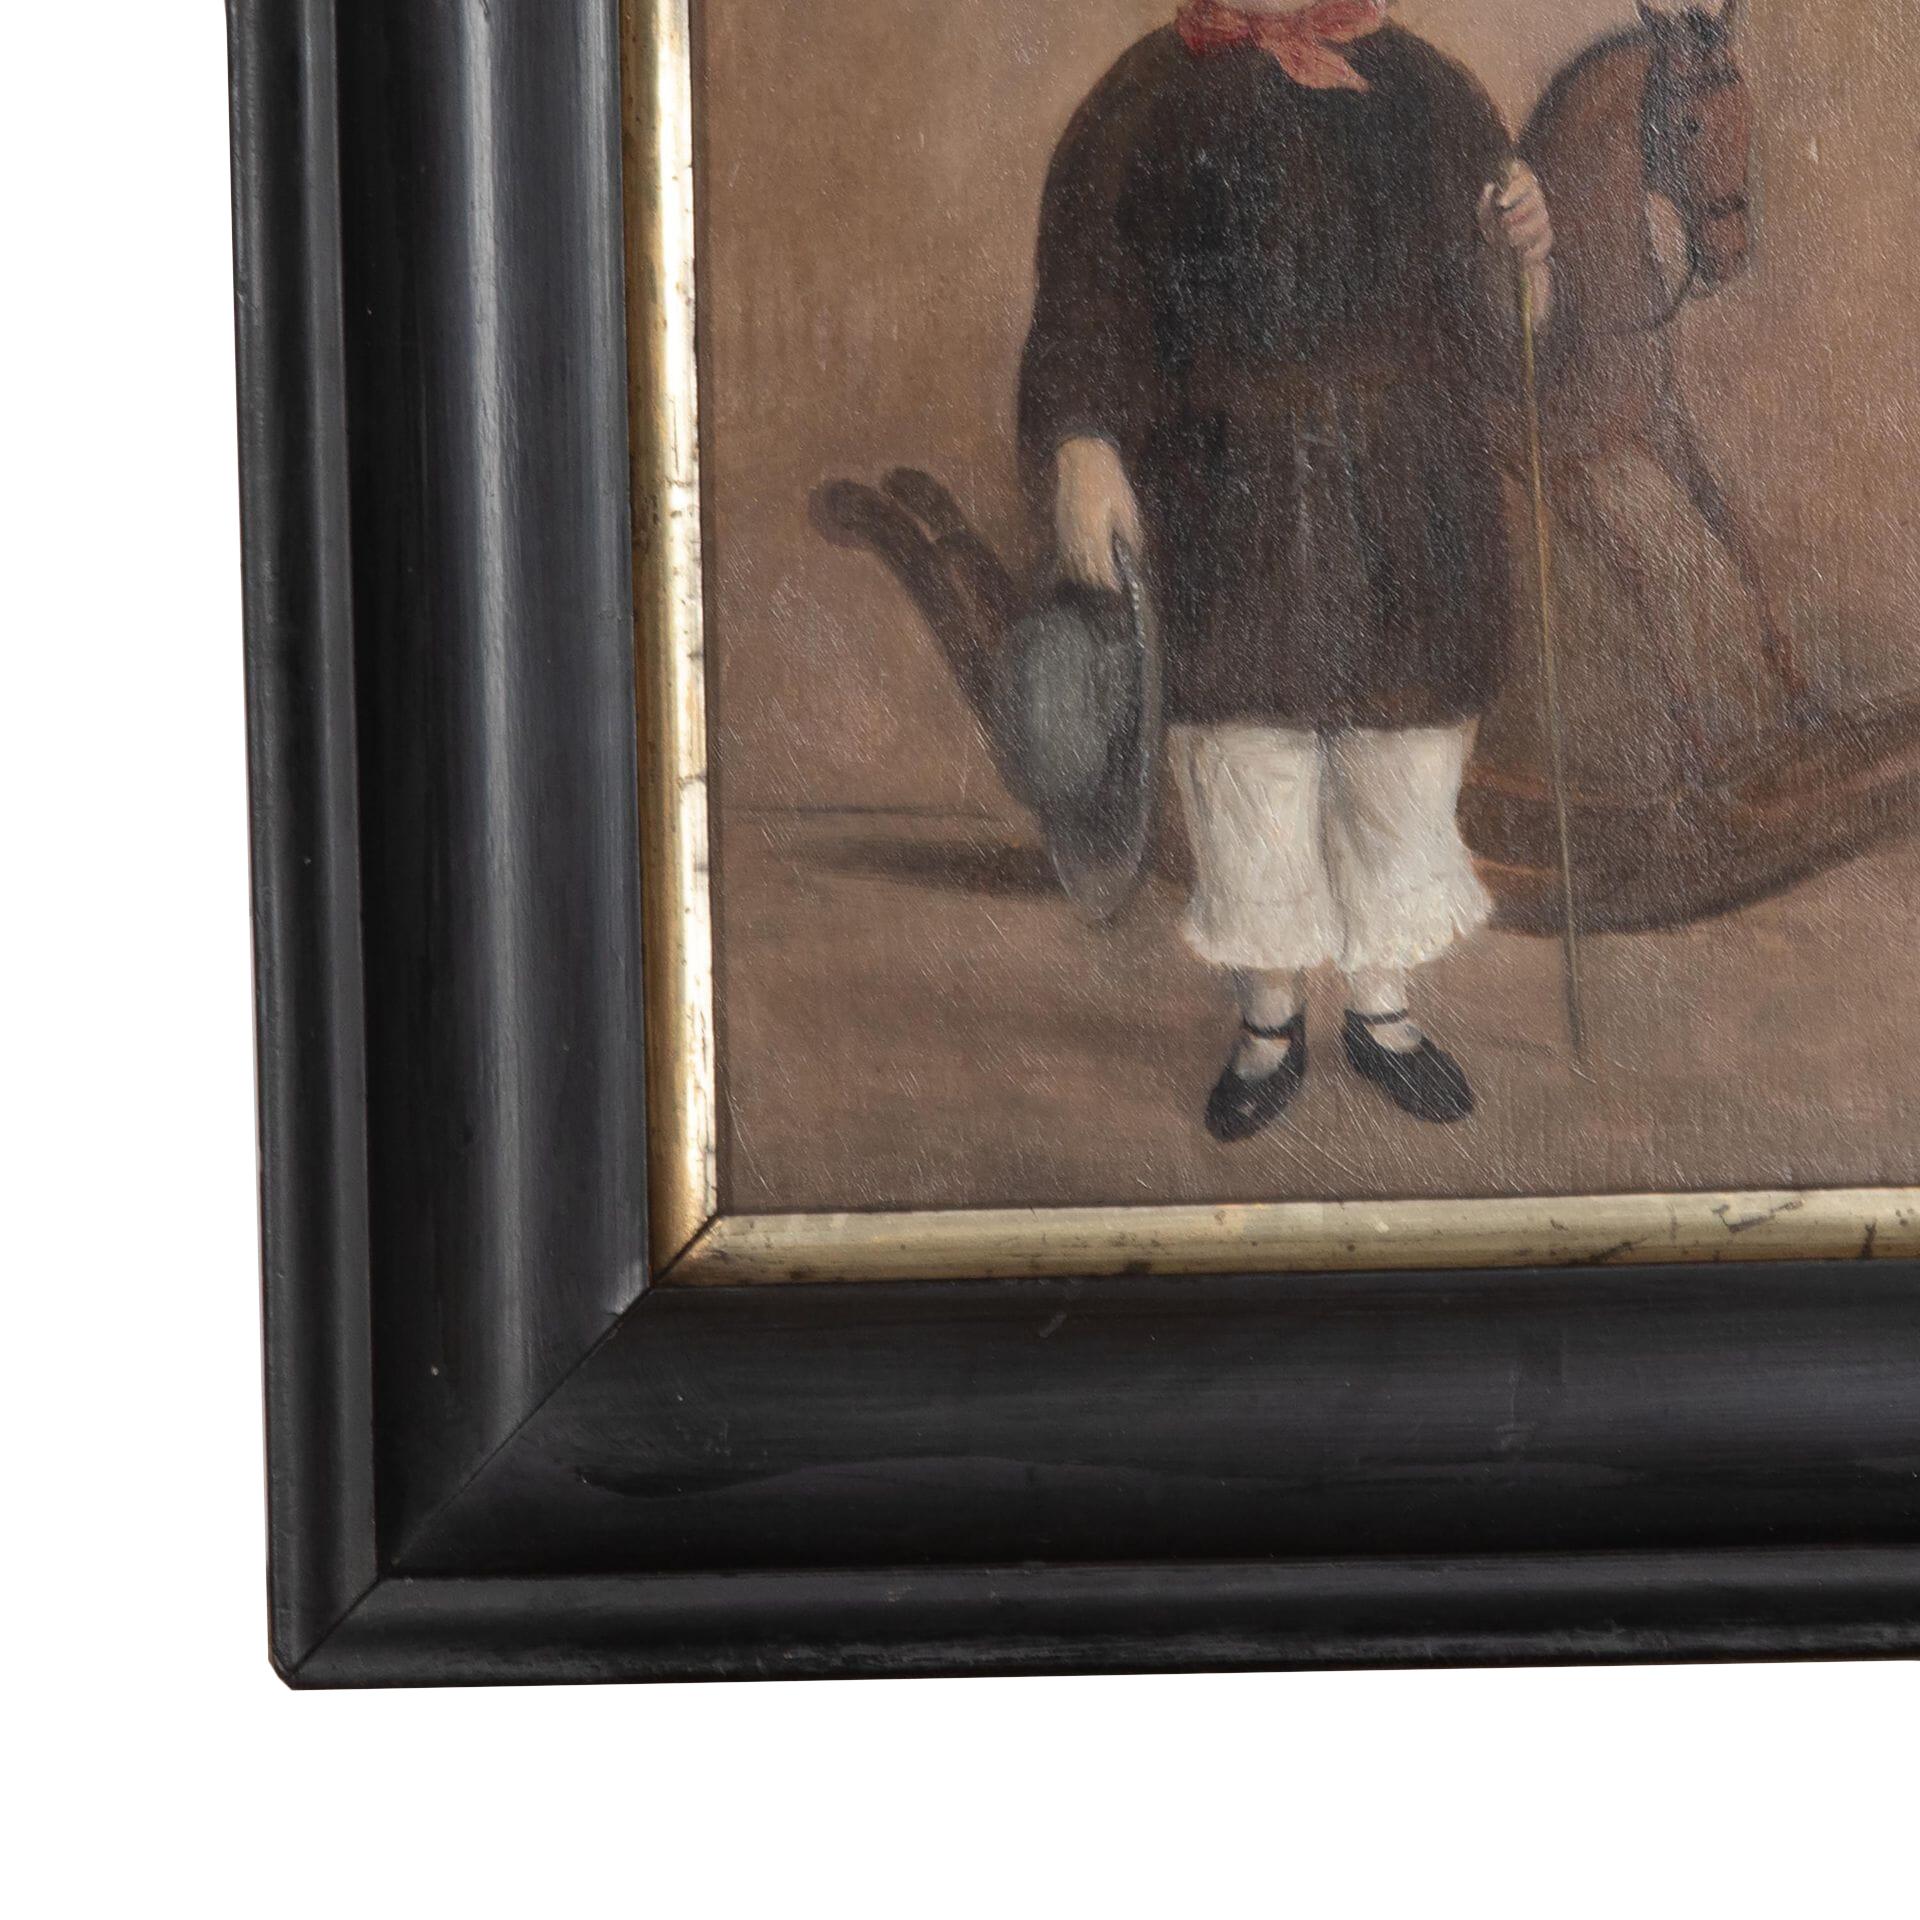 19th Century naive painting of a boy with his rocking horse.
Oil on board.